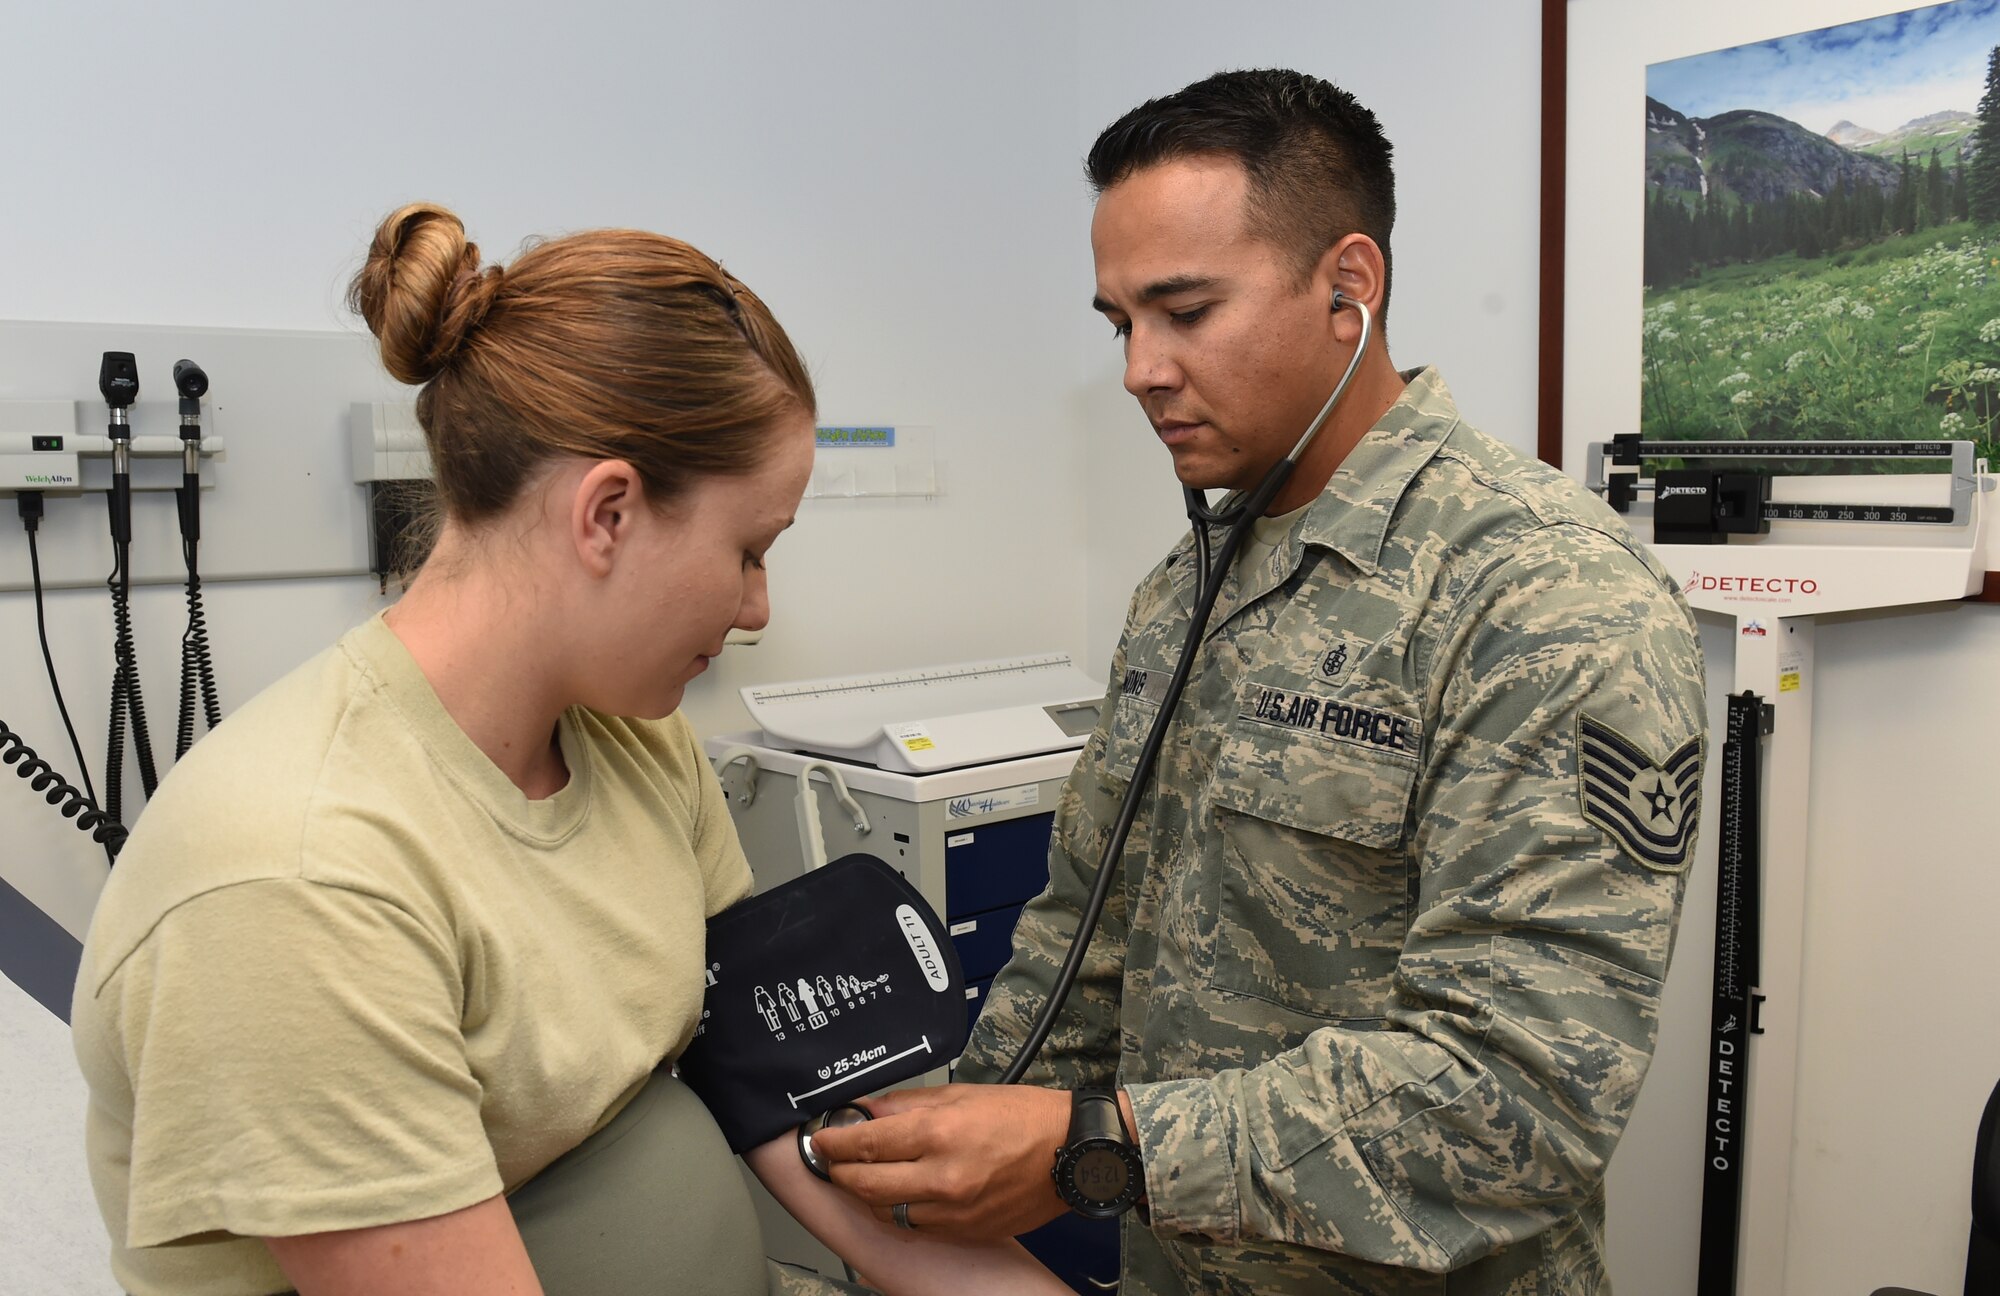 Senior Airman Kassi Borgard, 460th Medical Group Aerospace Medical Service journeyman, has her blood pressure taken by Tech Sgt. Danny Wong, 460th Medical Support Squadron aerospace medical technician, during a medical screening at the clinic on base. Wong has worked as a medic in military emergency rooms across the country and has deployed to Germany and Afghanistan, working as a direct influence in the safe treatment and return of warfighters. (U.S. Air Force photo by Airman 1st Class Samantha Saulsbury/Released)